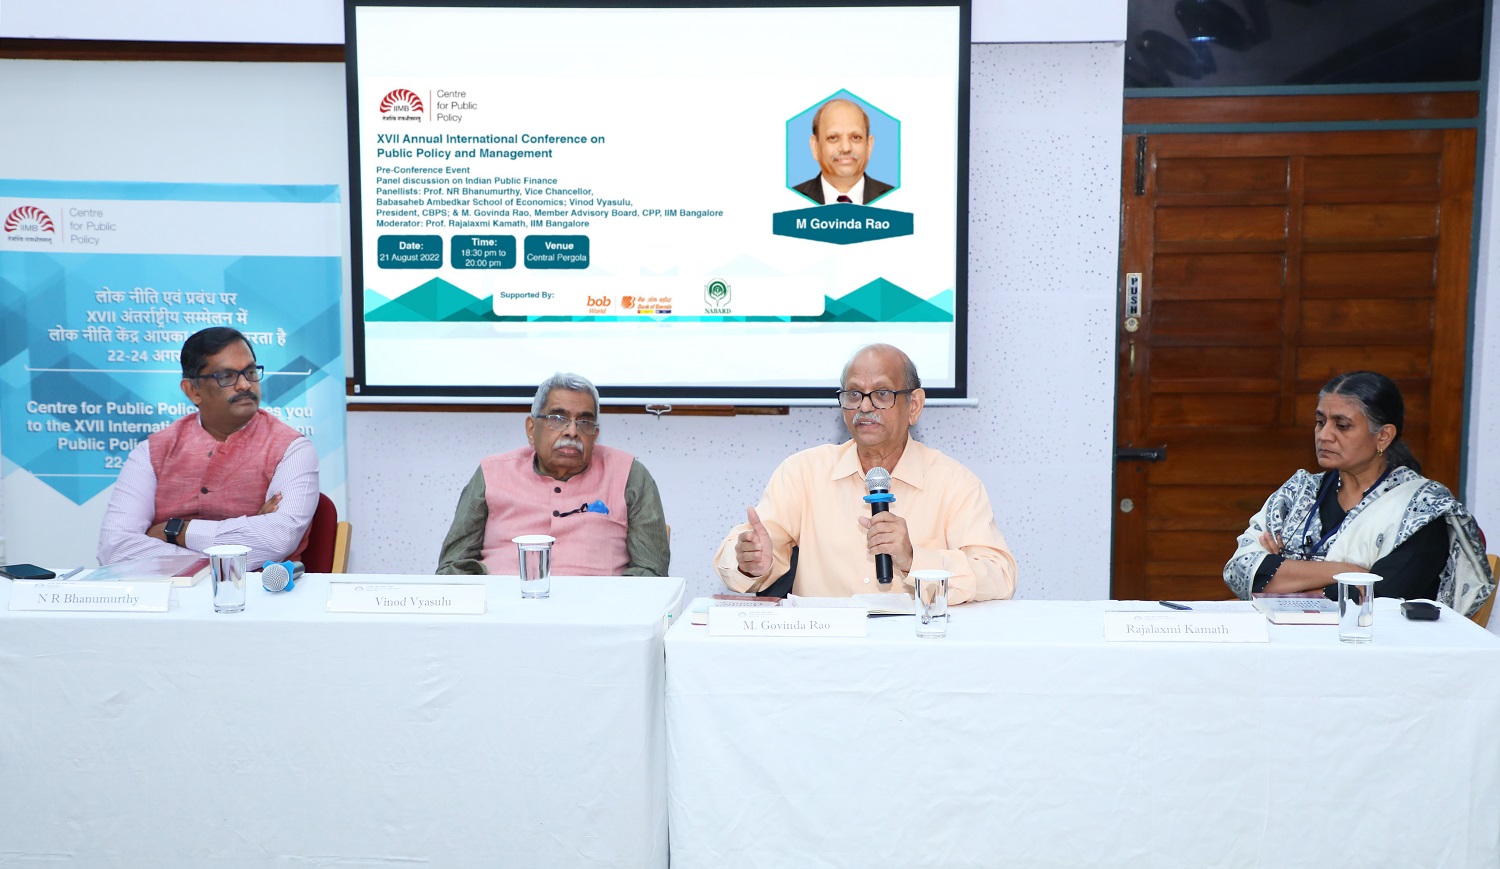 (Panel 1) In a pre-conference event on 21st August 2022, Prof. Rajalaxmi Kamath, from the Centre for Public Policy, moderates a panel on Indian Public Finance. The panellists include Prof. NR Bhanumurthy, Vice Chancellor, Babasaheb Ambedkar School of Economics, Vinod Vyasulu, President, CBPS, and M. Govinda Rao, who is on the advisory committee of the Centre for Public Policy.